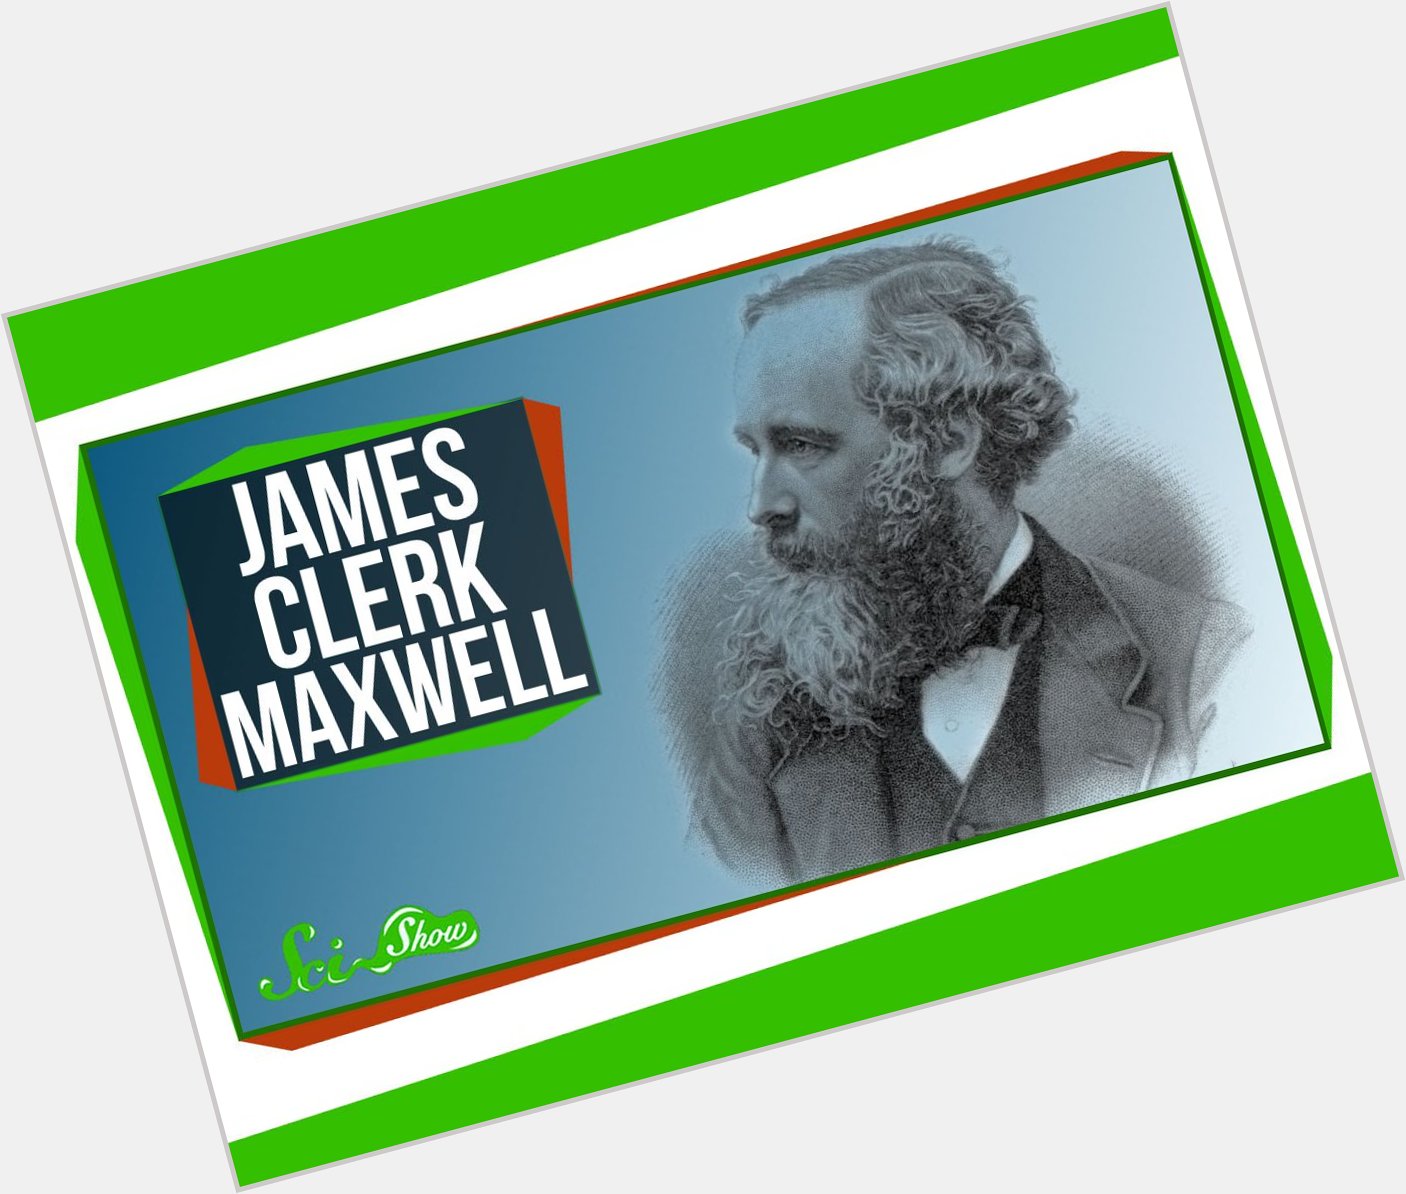 Happy birthday to James Clerk Maxwell, one of the greatest physicists who ever lived!  